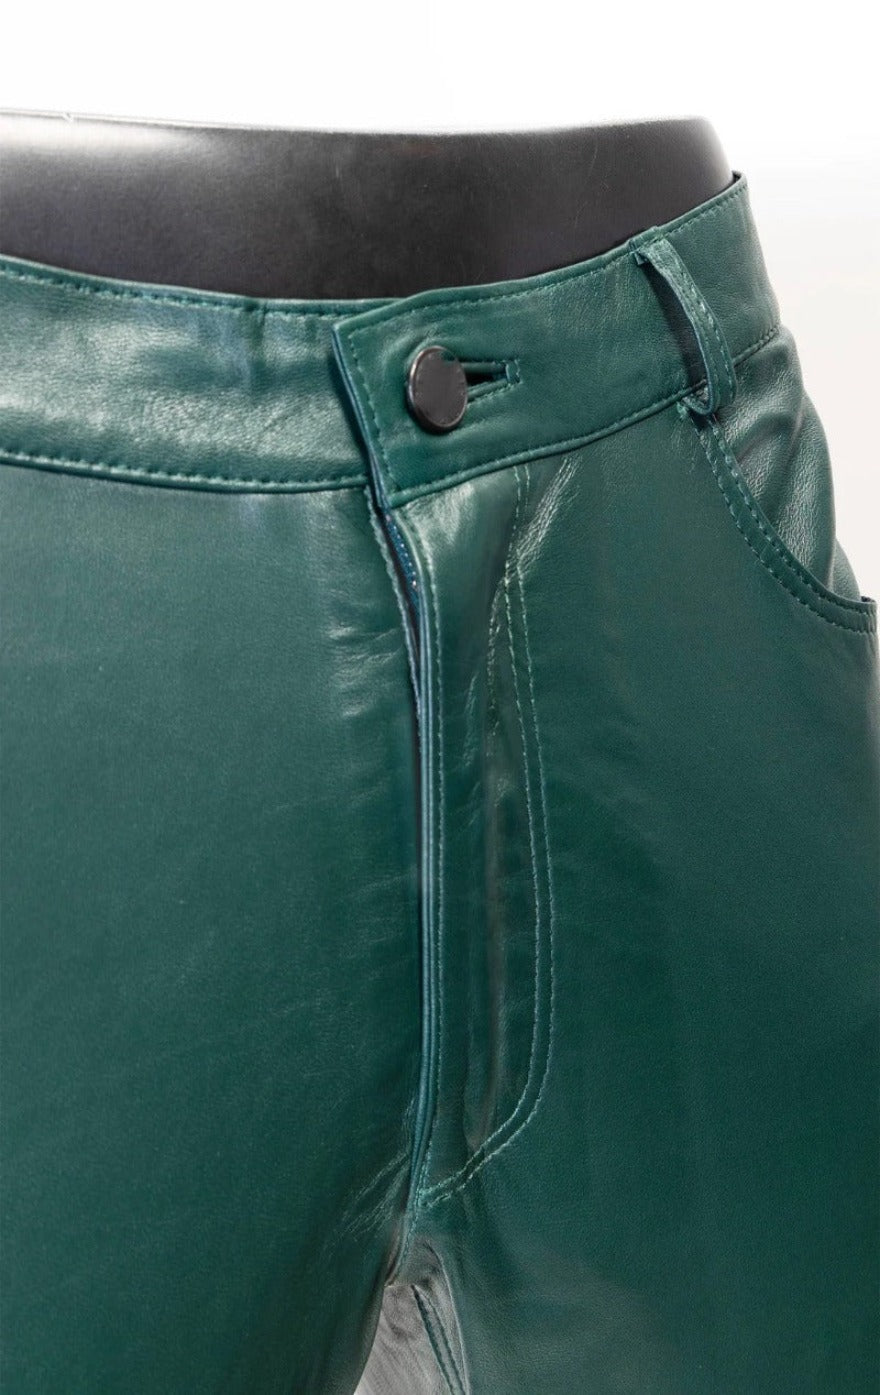 Blue Leather Pant Mens - All Types Of Leather Pants